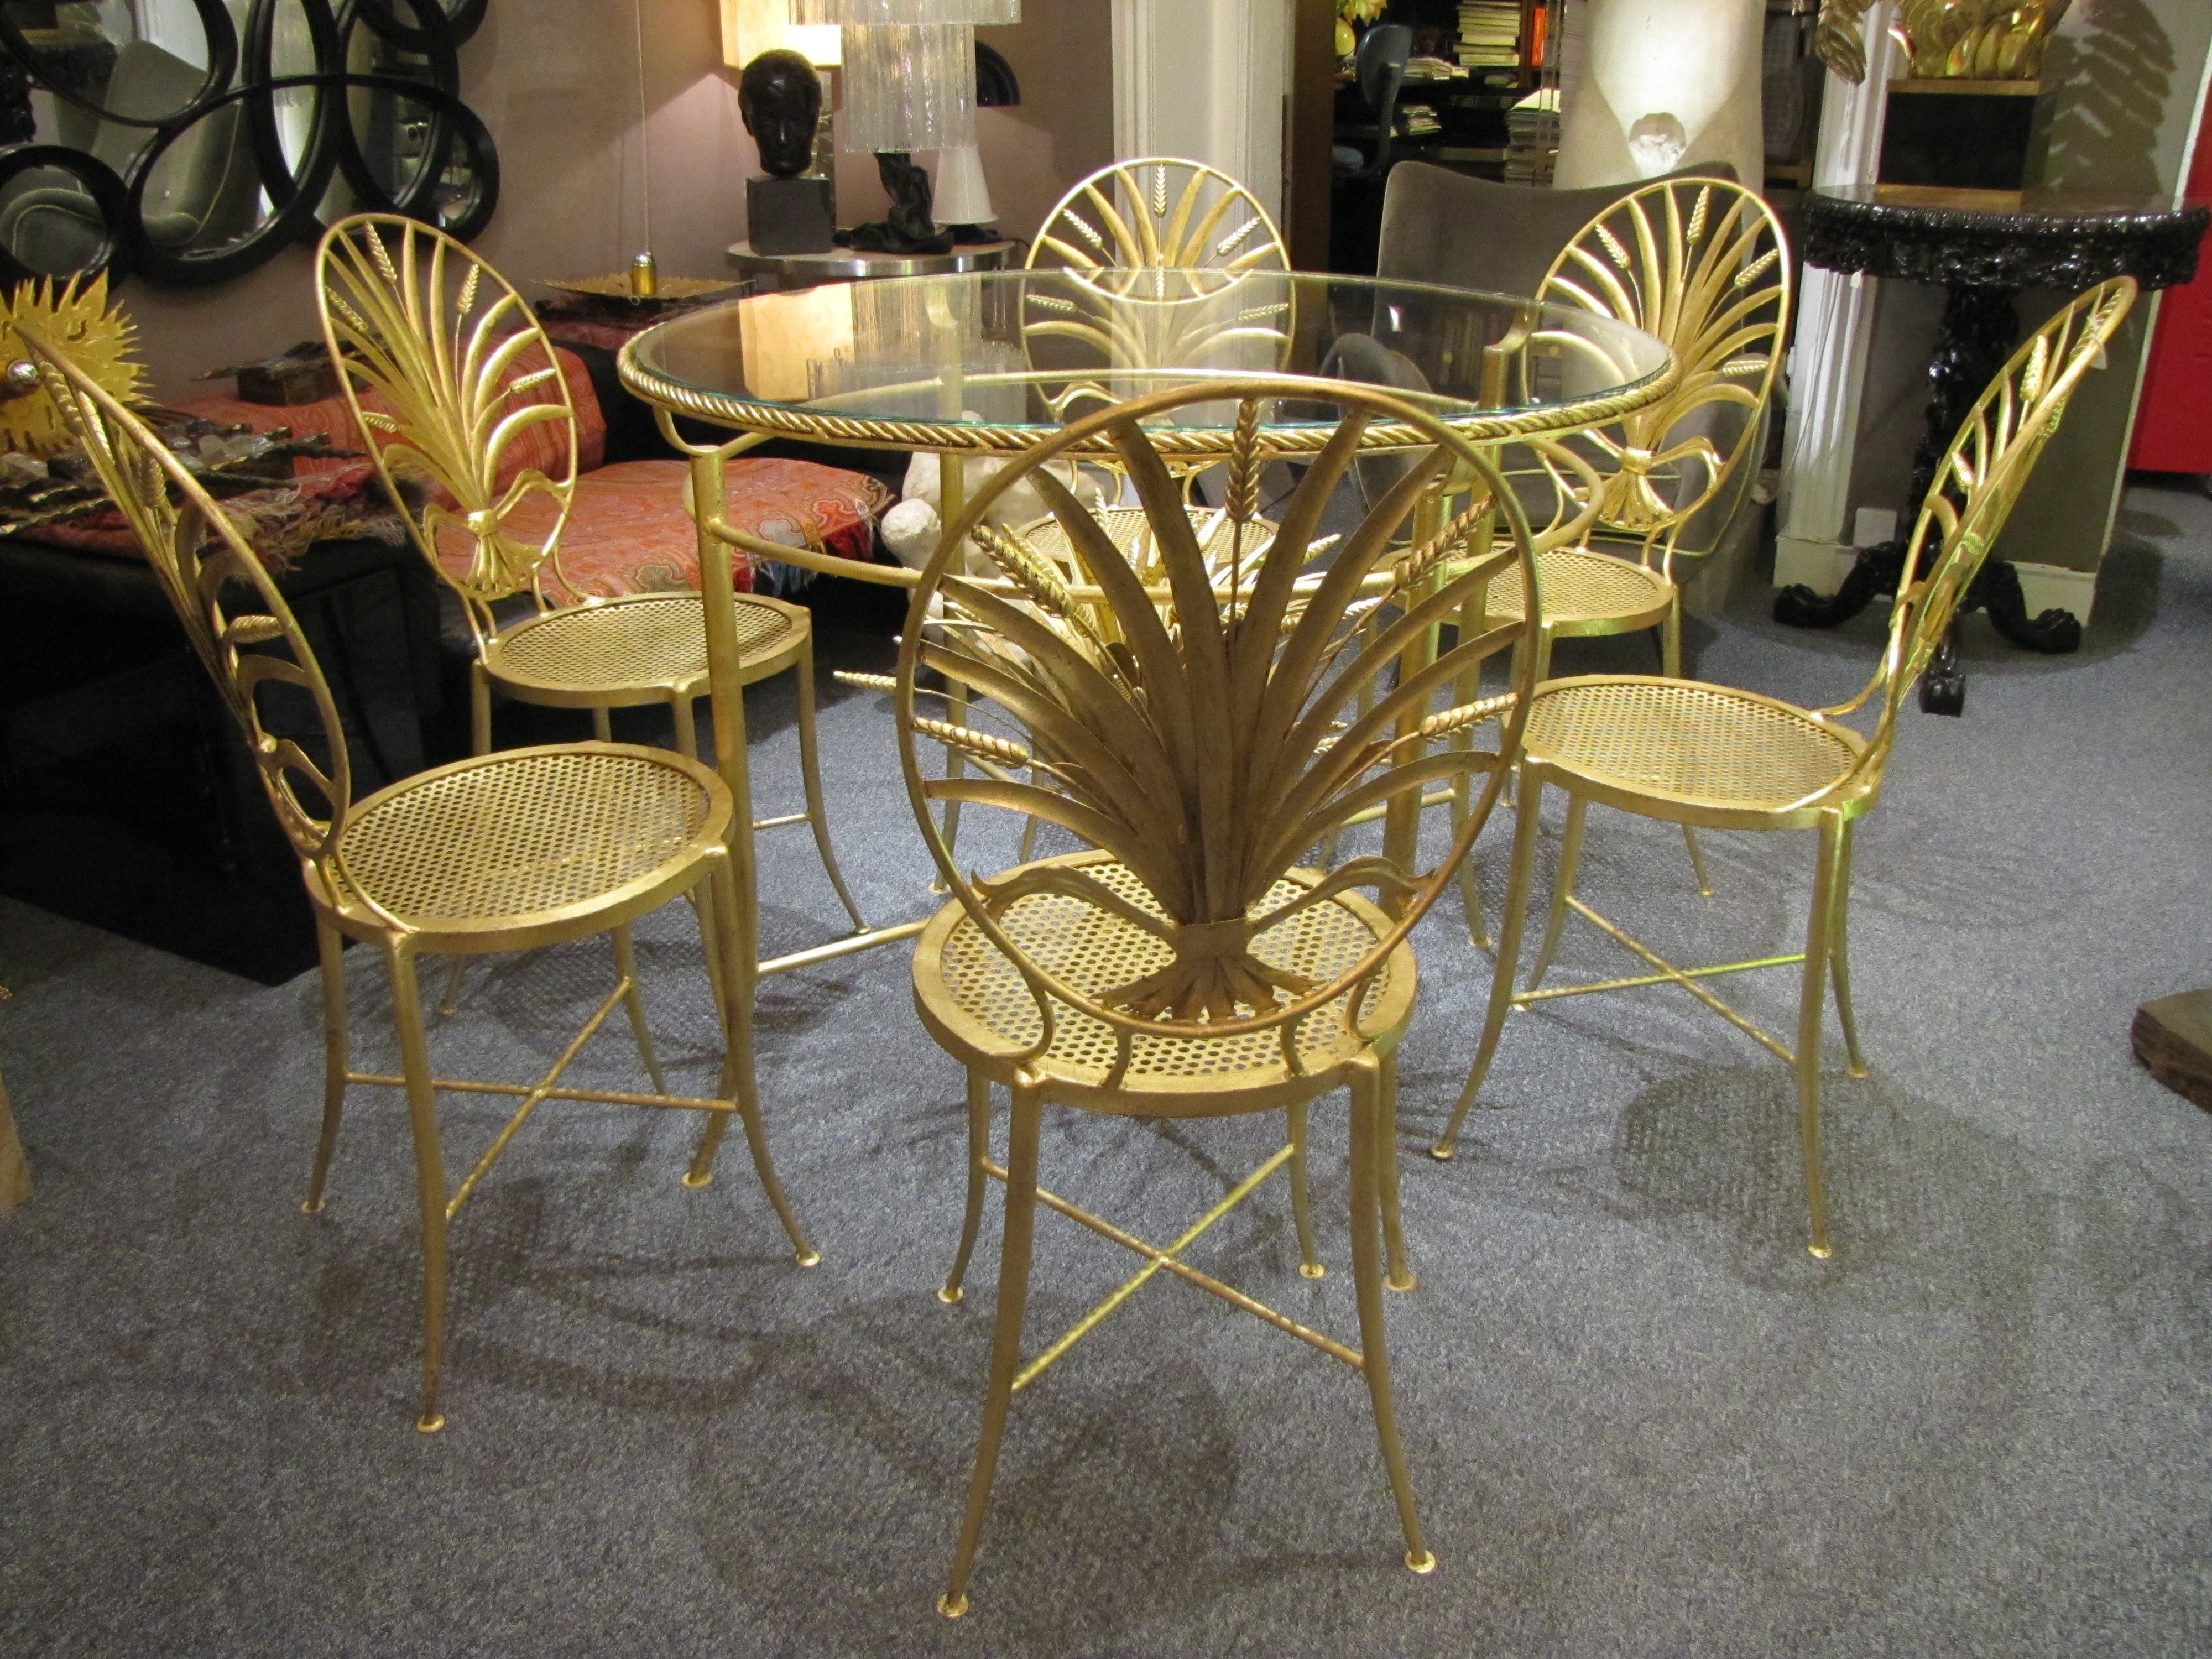 Rare set of 1960s Italian table and six chairs with elaborately detailed backs, in the design of a sheaf of wheat. Raised on gorgeous slim legs with X stretchers, Classic Italian gilt gold finishing. Made by S. Salvadori, Firenze, circa 1960.

The